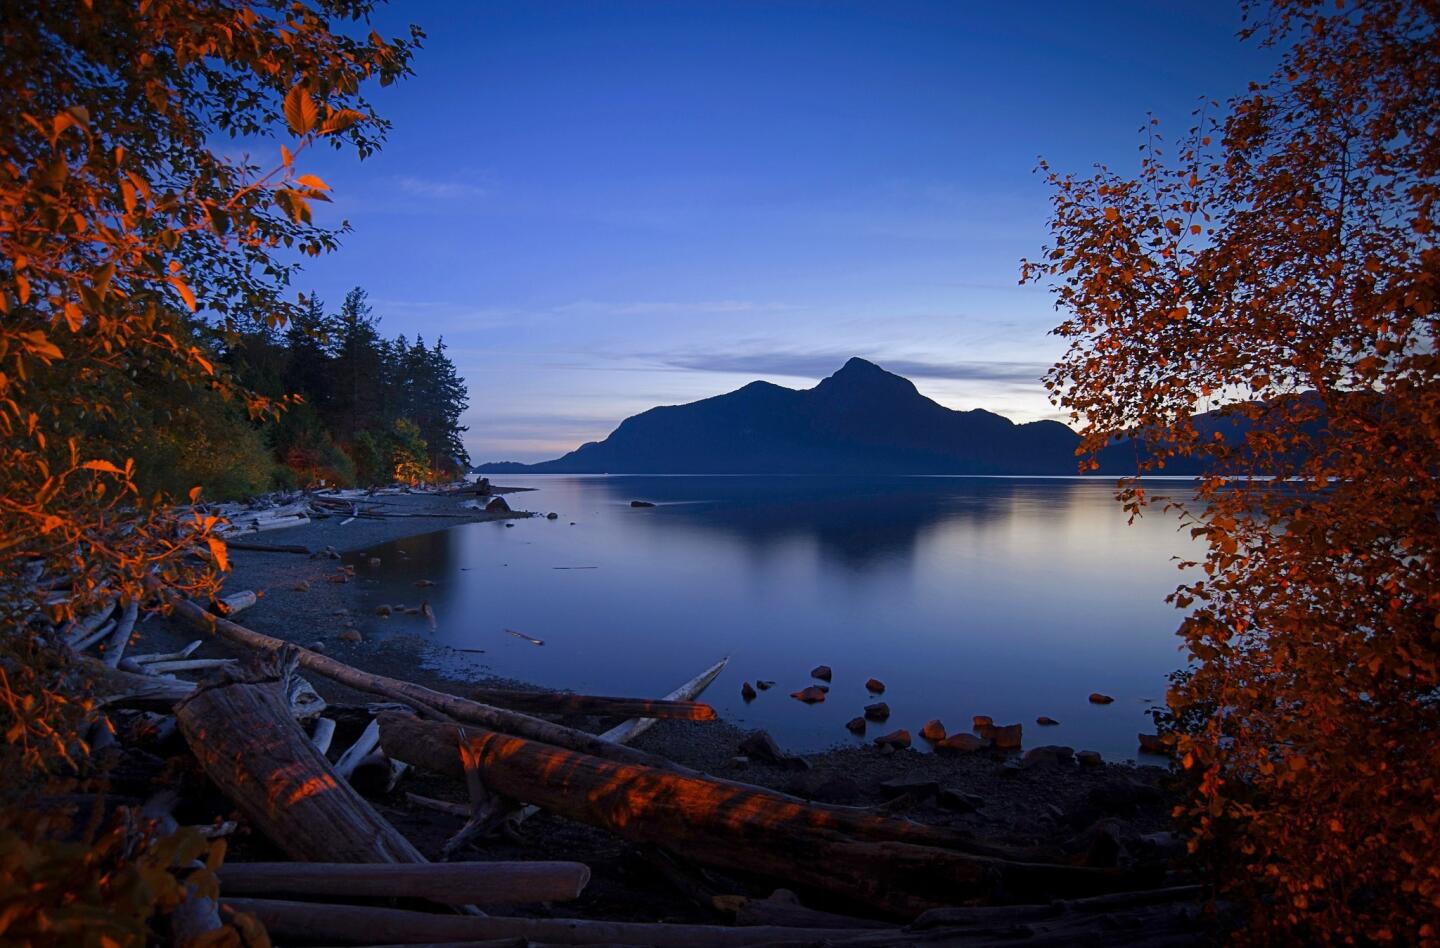 Porteau Cove Provincial Park, about 27 miles north of Vancouver, is a popular destination for scuba divers, who can explore a shipwreck and artificial reefs hidden within Howe Sound.